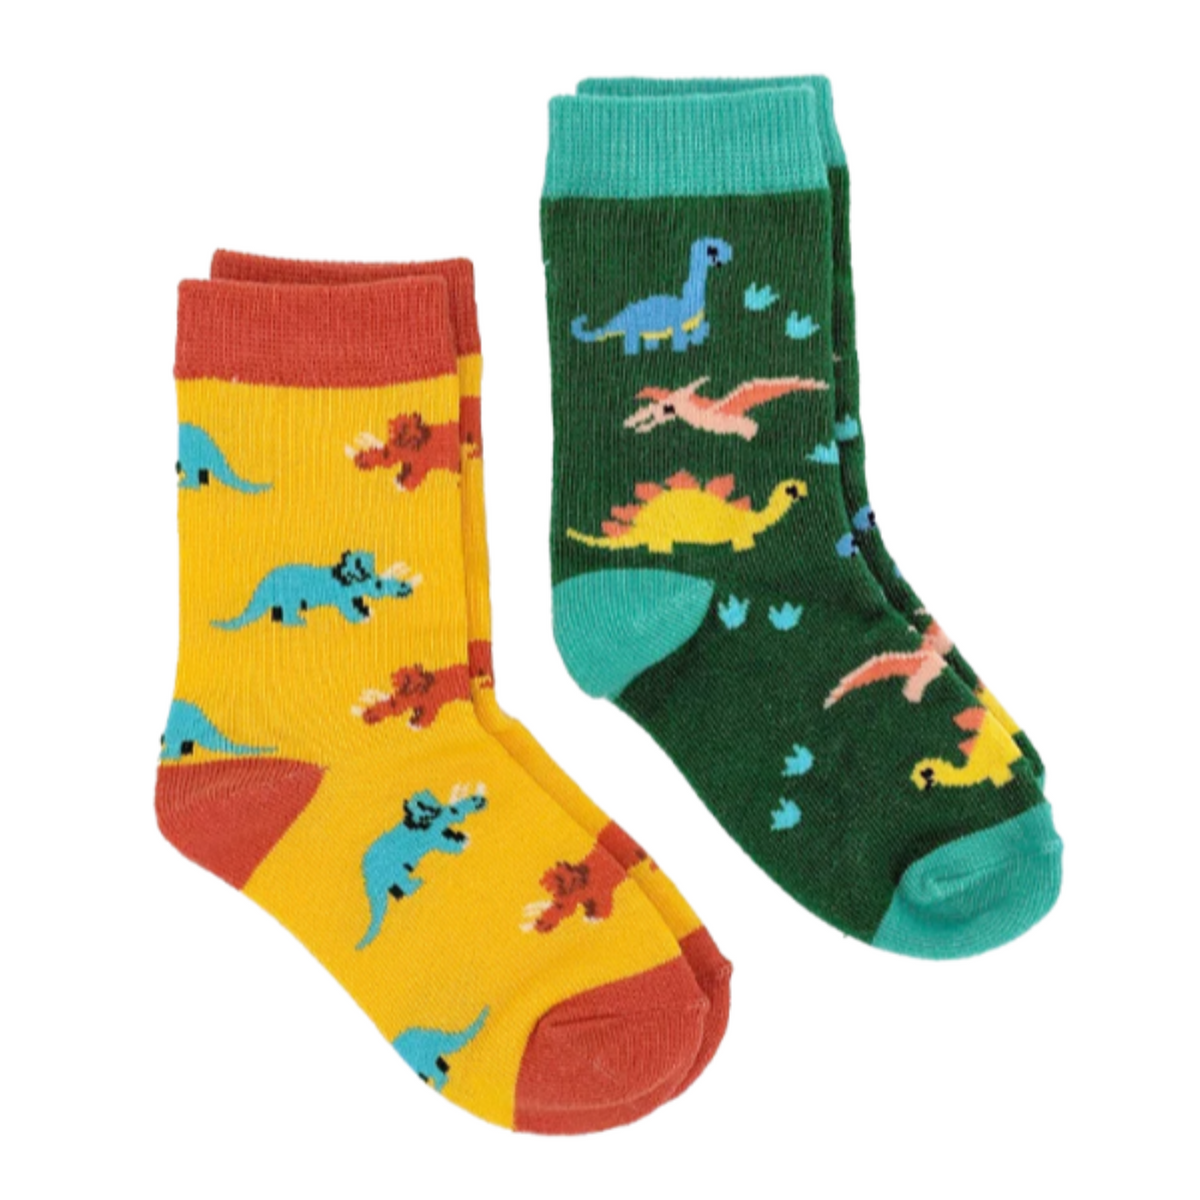 Sock Harbor Dinosaurs 2-pack kids&#39; socks featuring yellow sock with blue and red Triceratops &amp; green sock with blue Brontosaurus and yellow and pink other dinosaurs. Socks shown flat on display. 